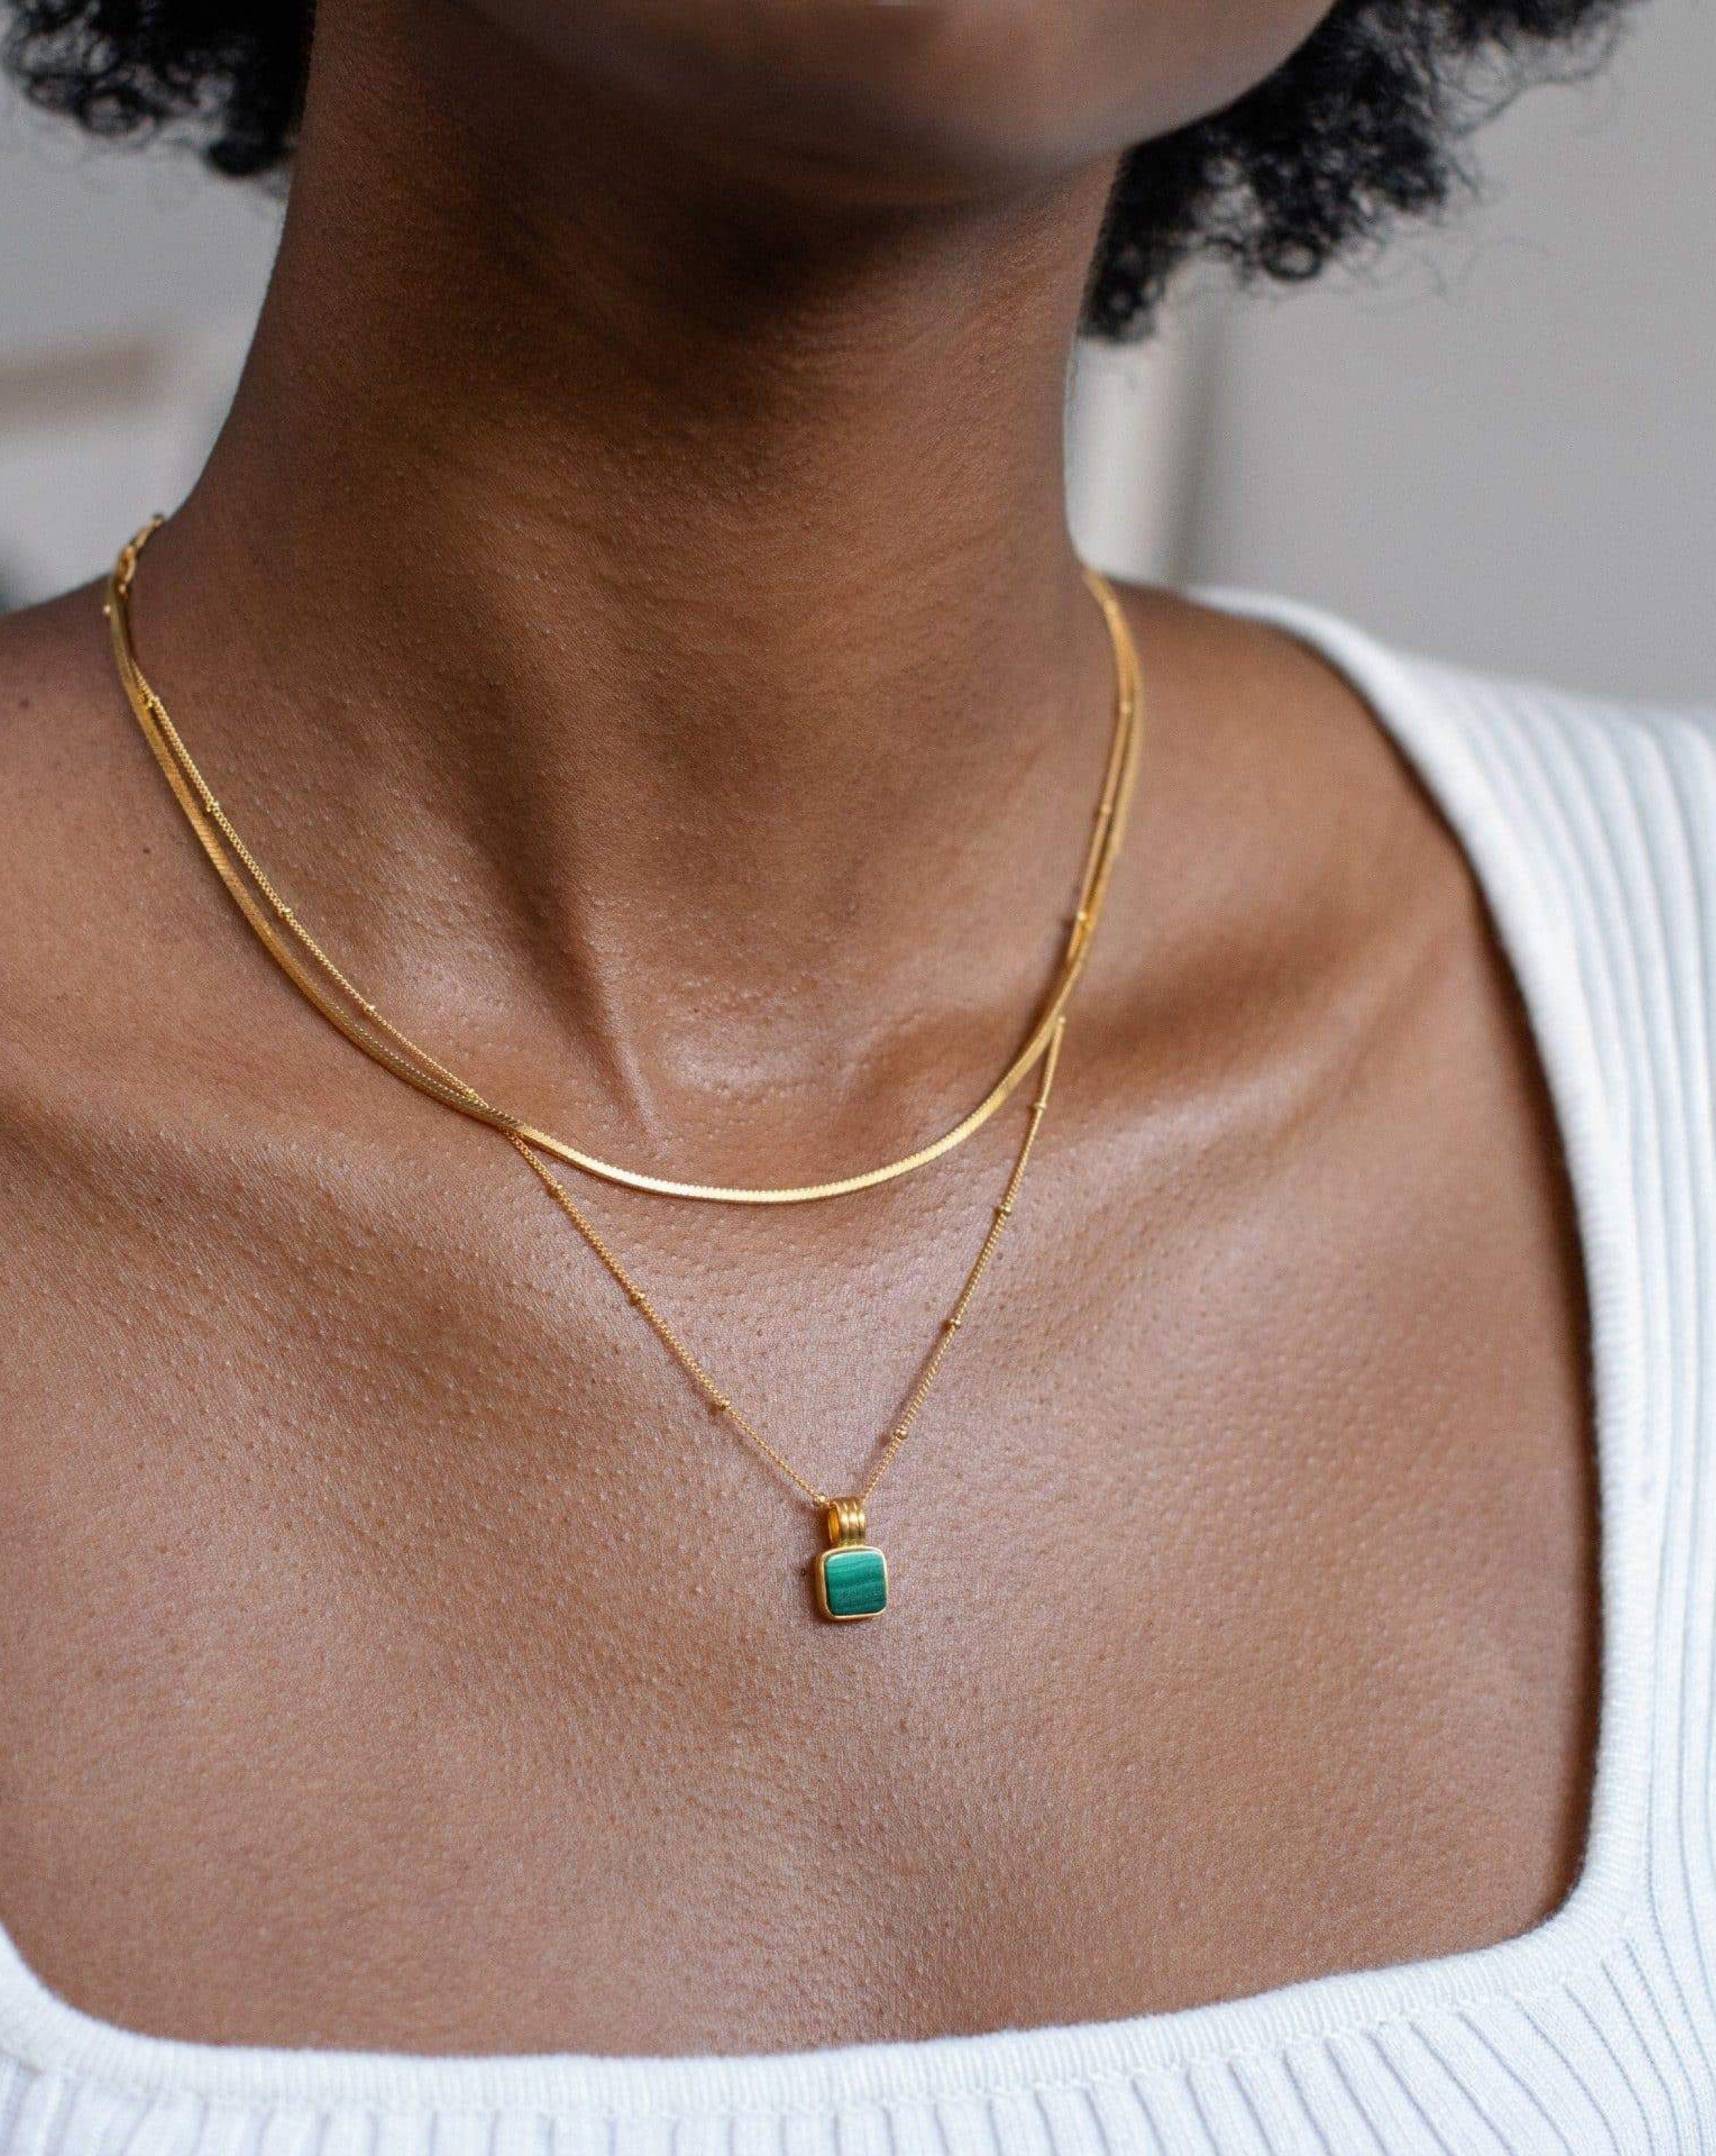 Iconic Lucy Williams Malachite Necklace Set | 18ct Gold Plated Vermeil/Malachite Necklaces Missoma 